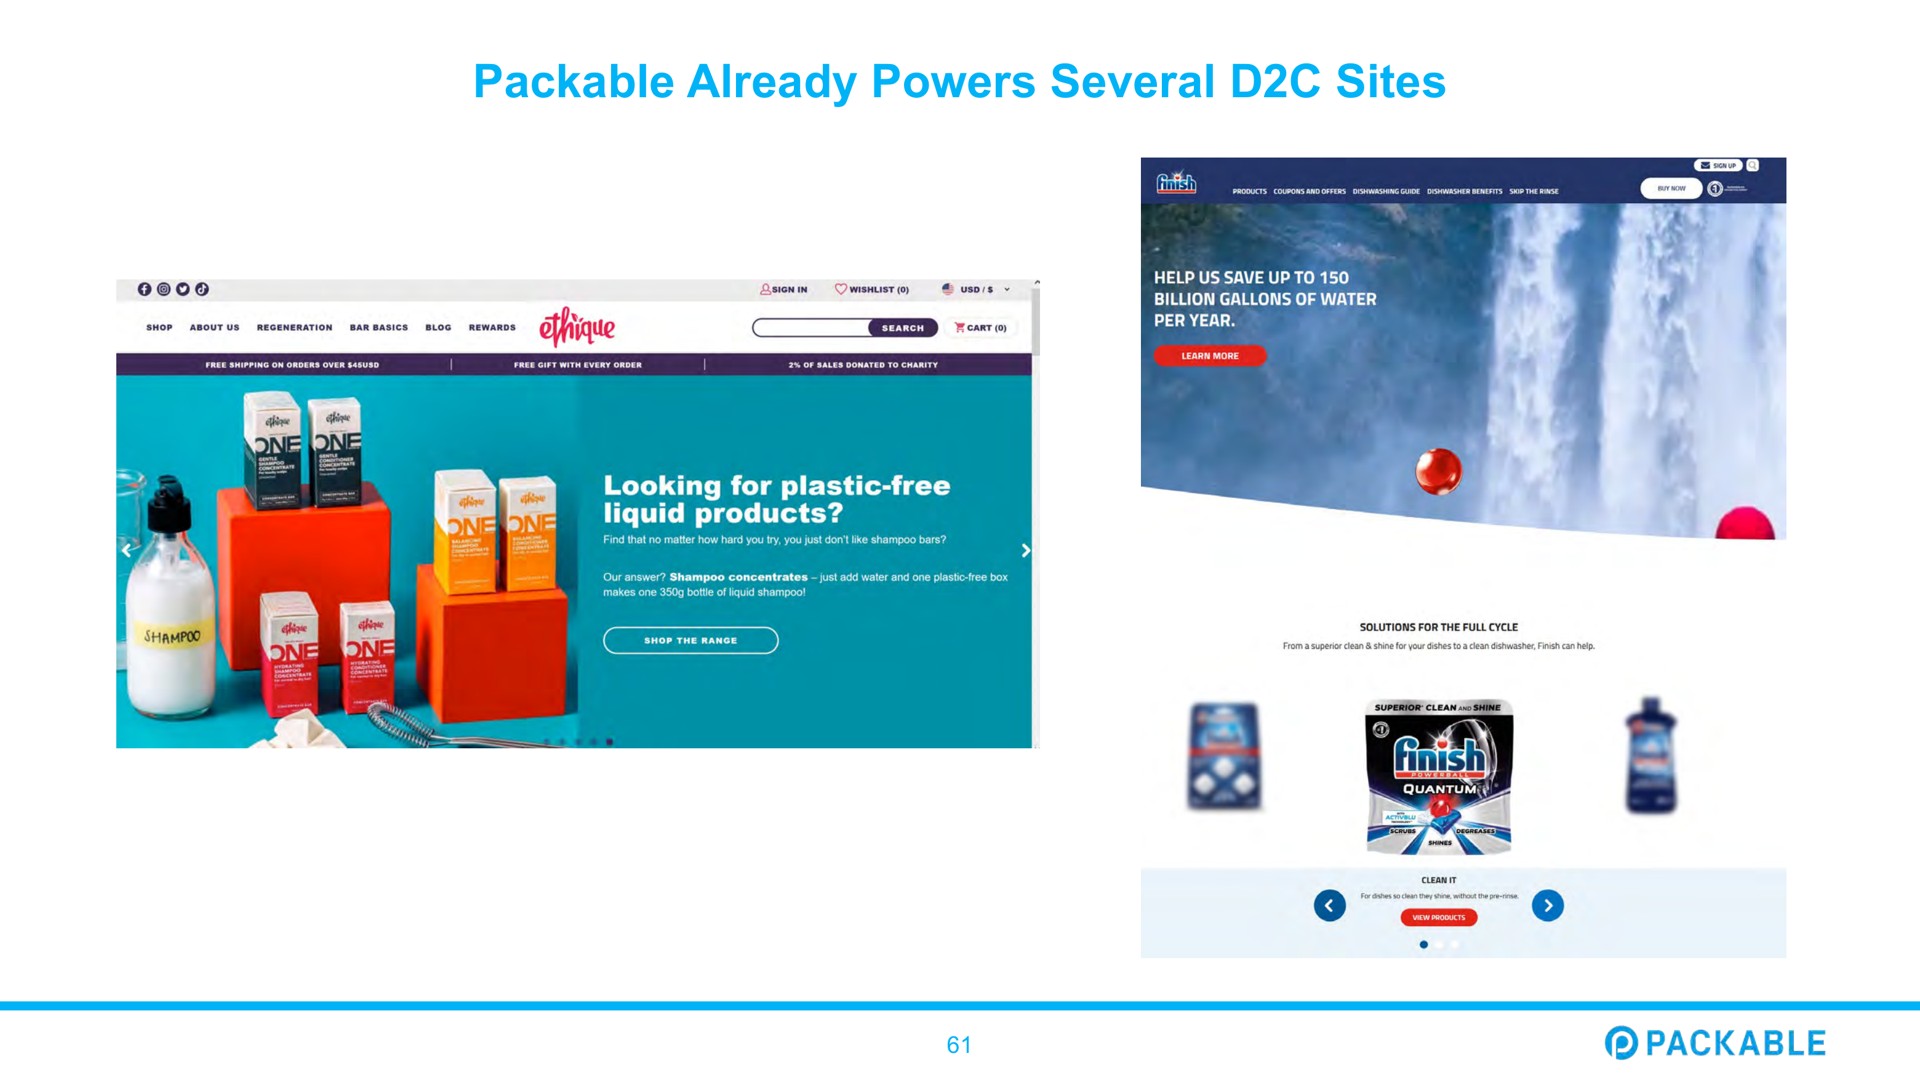 packable already powers several sites | Packable